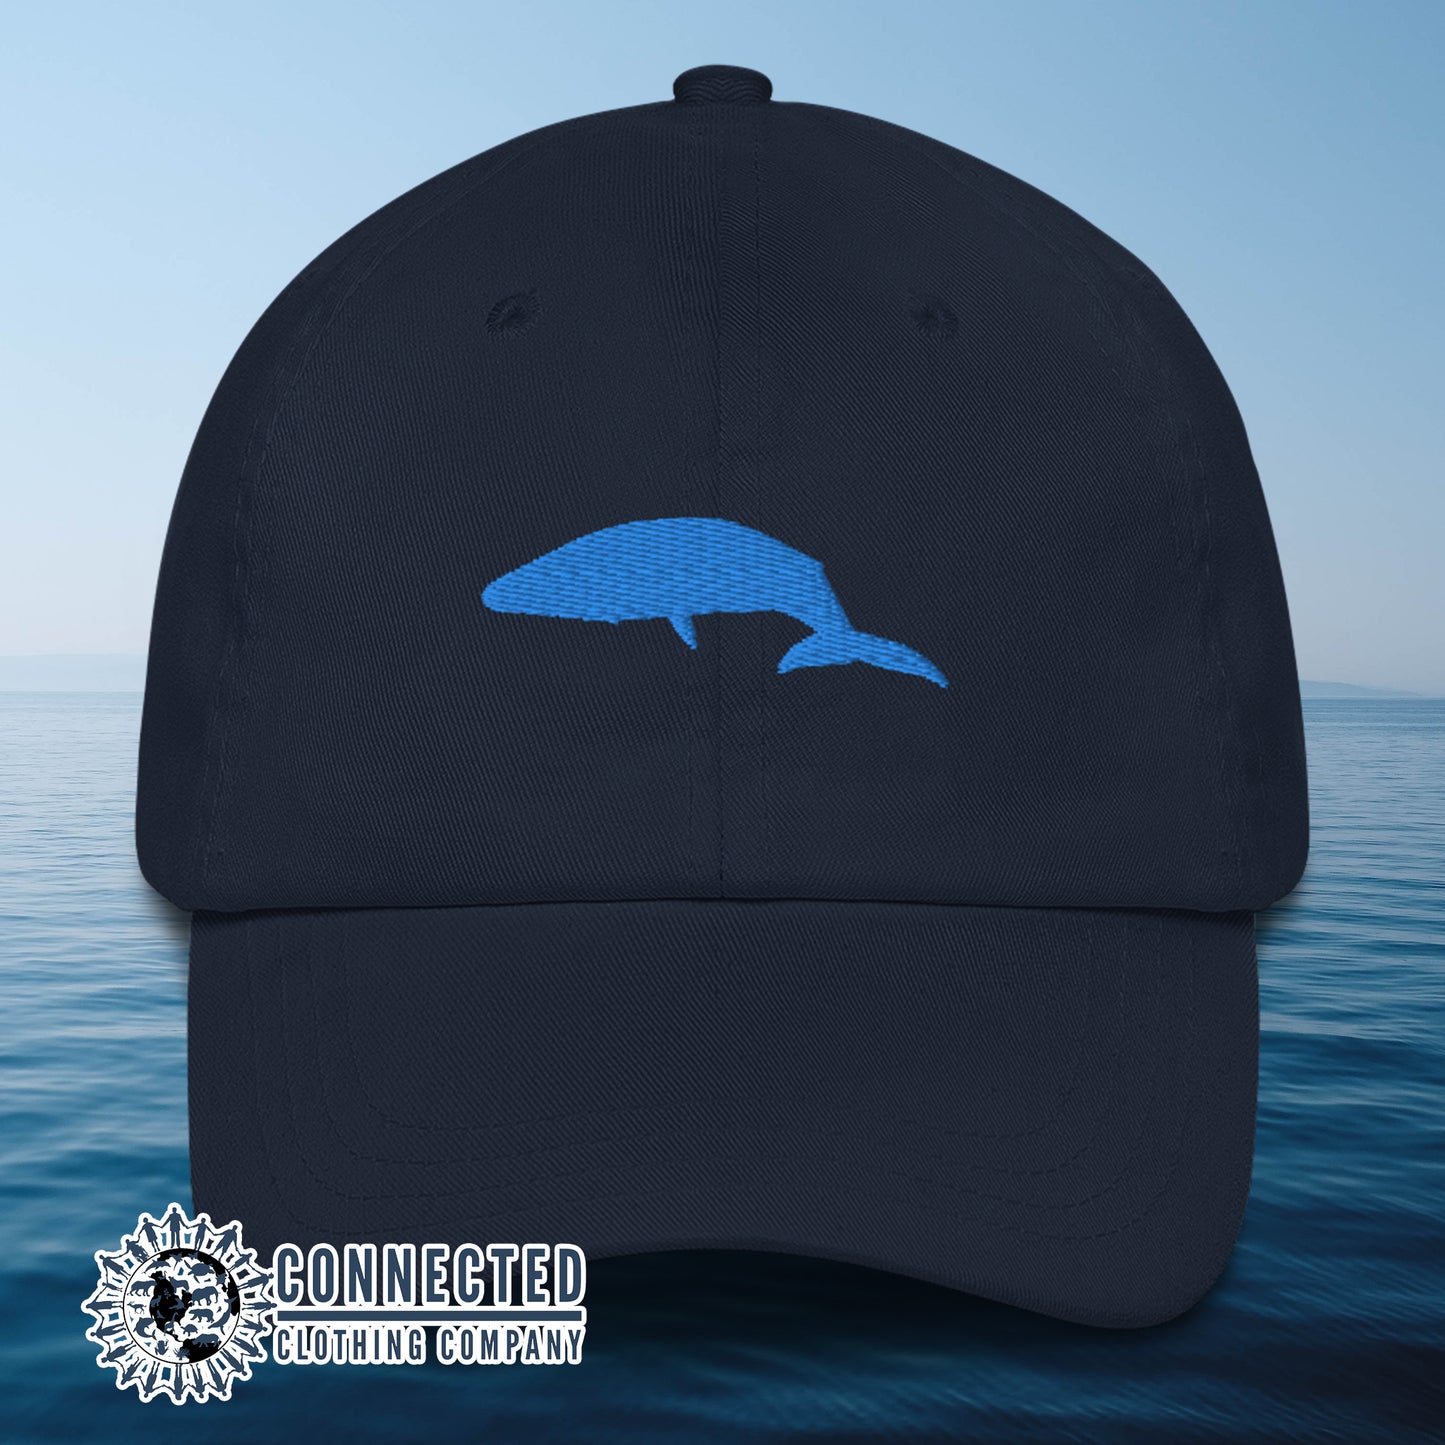 Navy Blue Blue Whale Cotton Cap - Connected Clothing Company - 10% of profits donated to Mission Blue ocean conservation